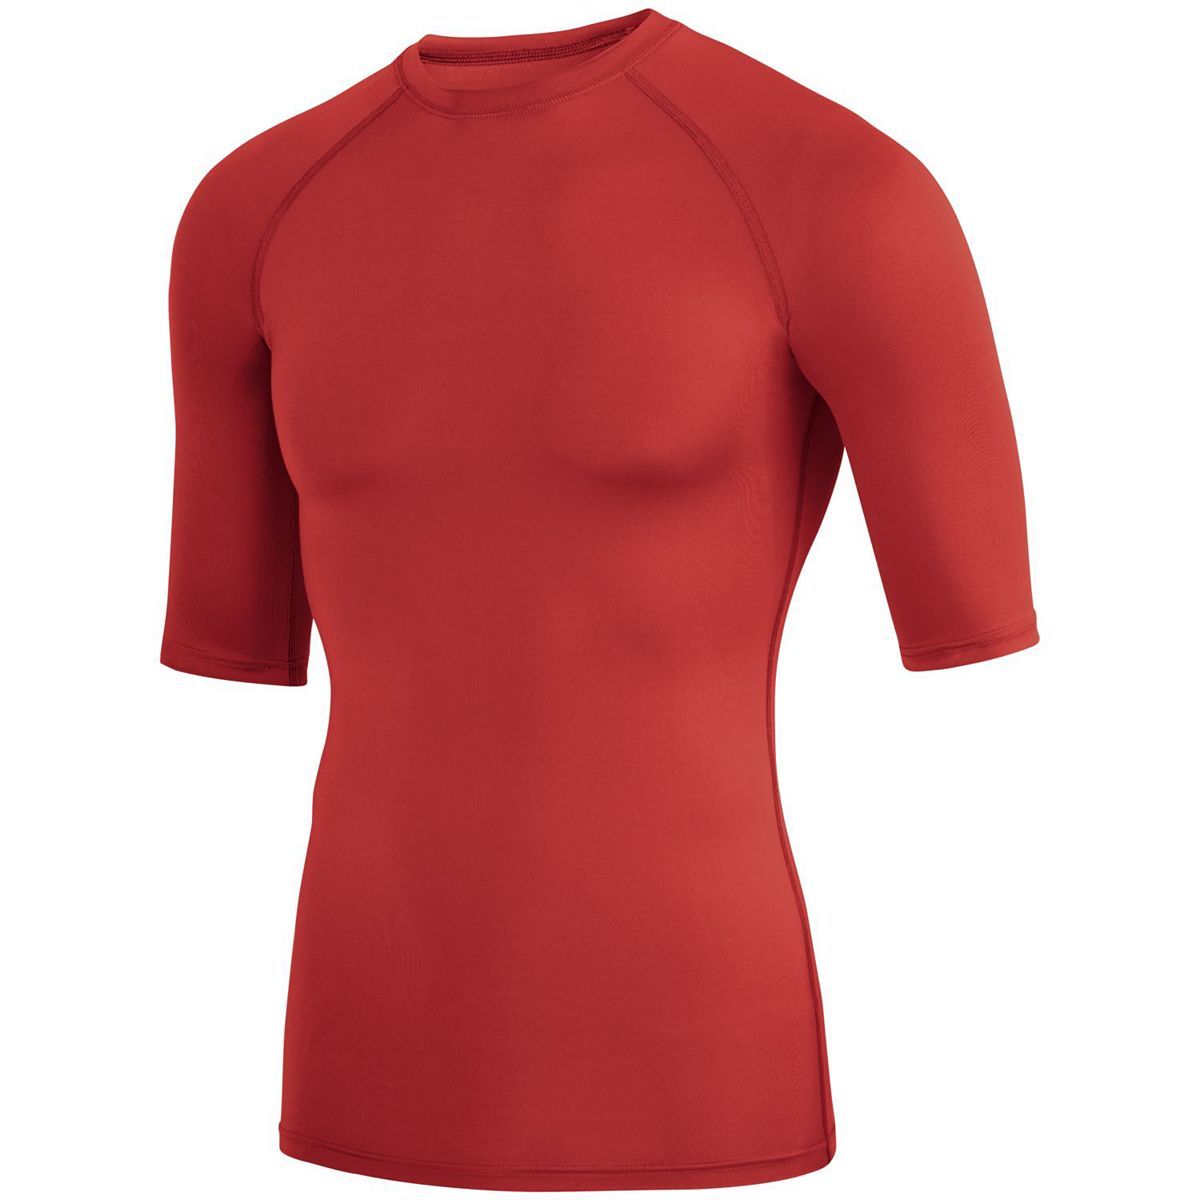 Augusta Sportswear Hyperform Compression Half Sleeve Tee in Red  -Part of the Adult, Adult-Tee-Shirt, T-Shirts, Augusta-Products, Shirts product lines at KanaleyCreations.com